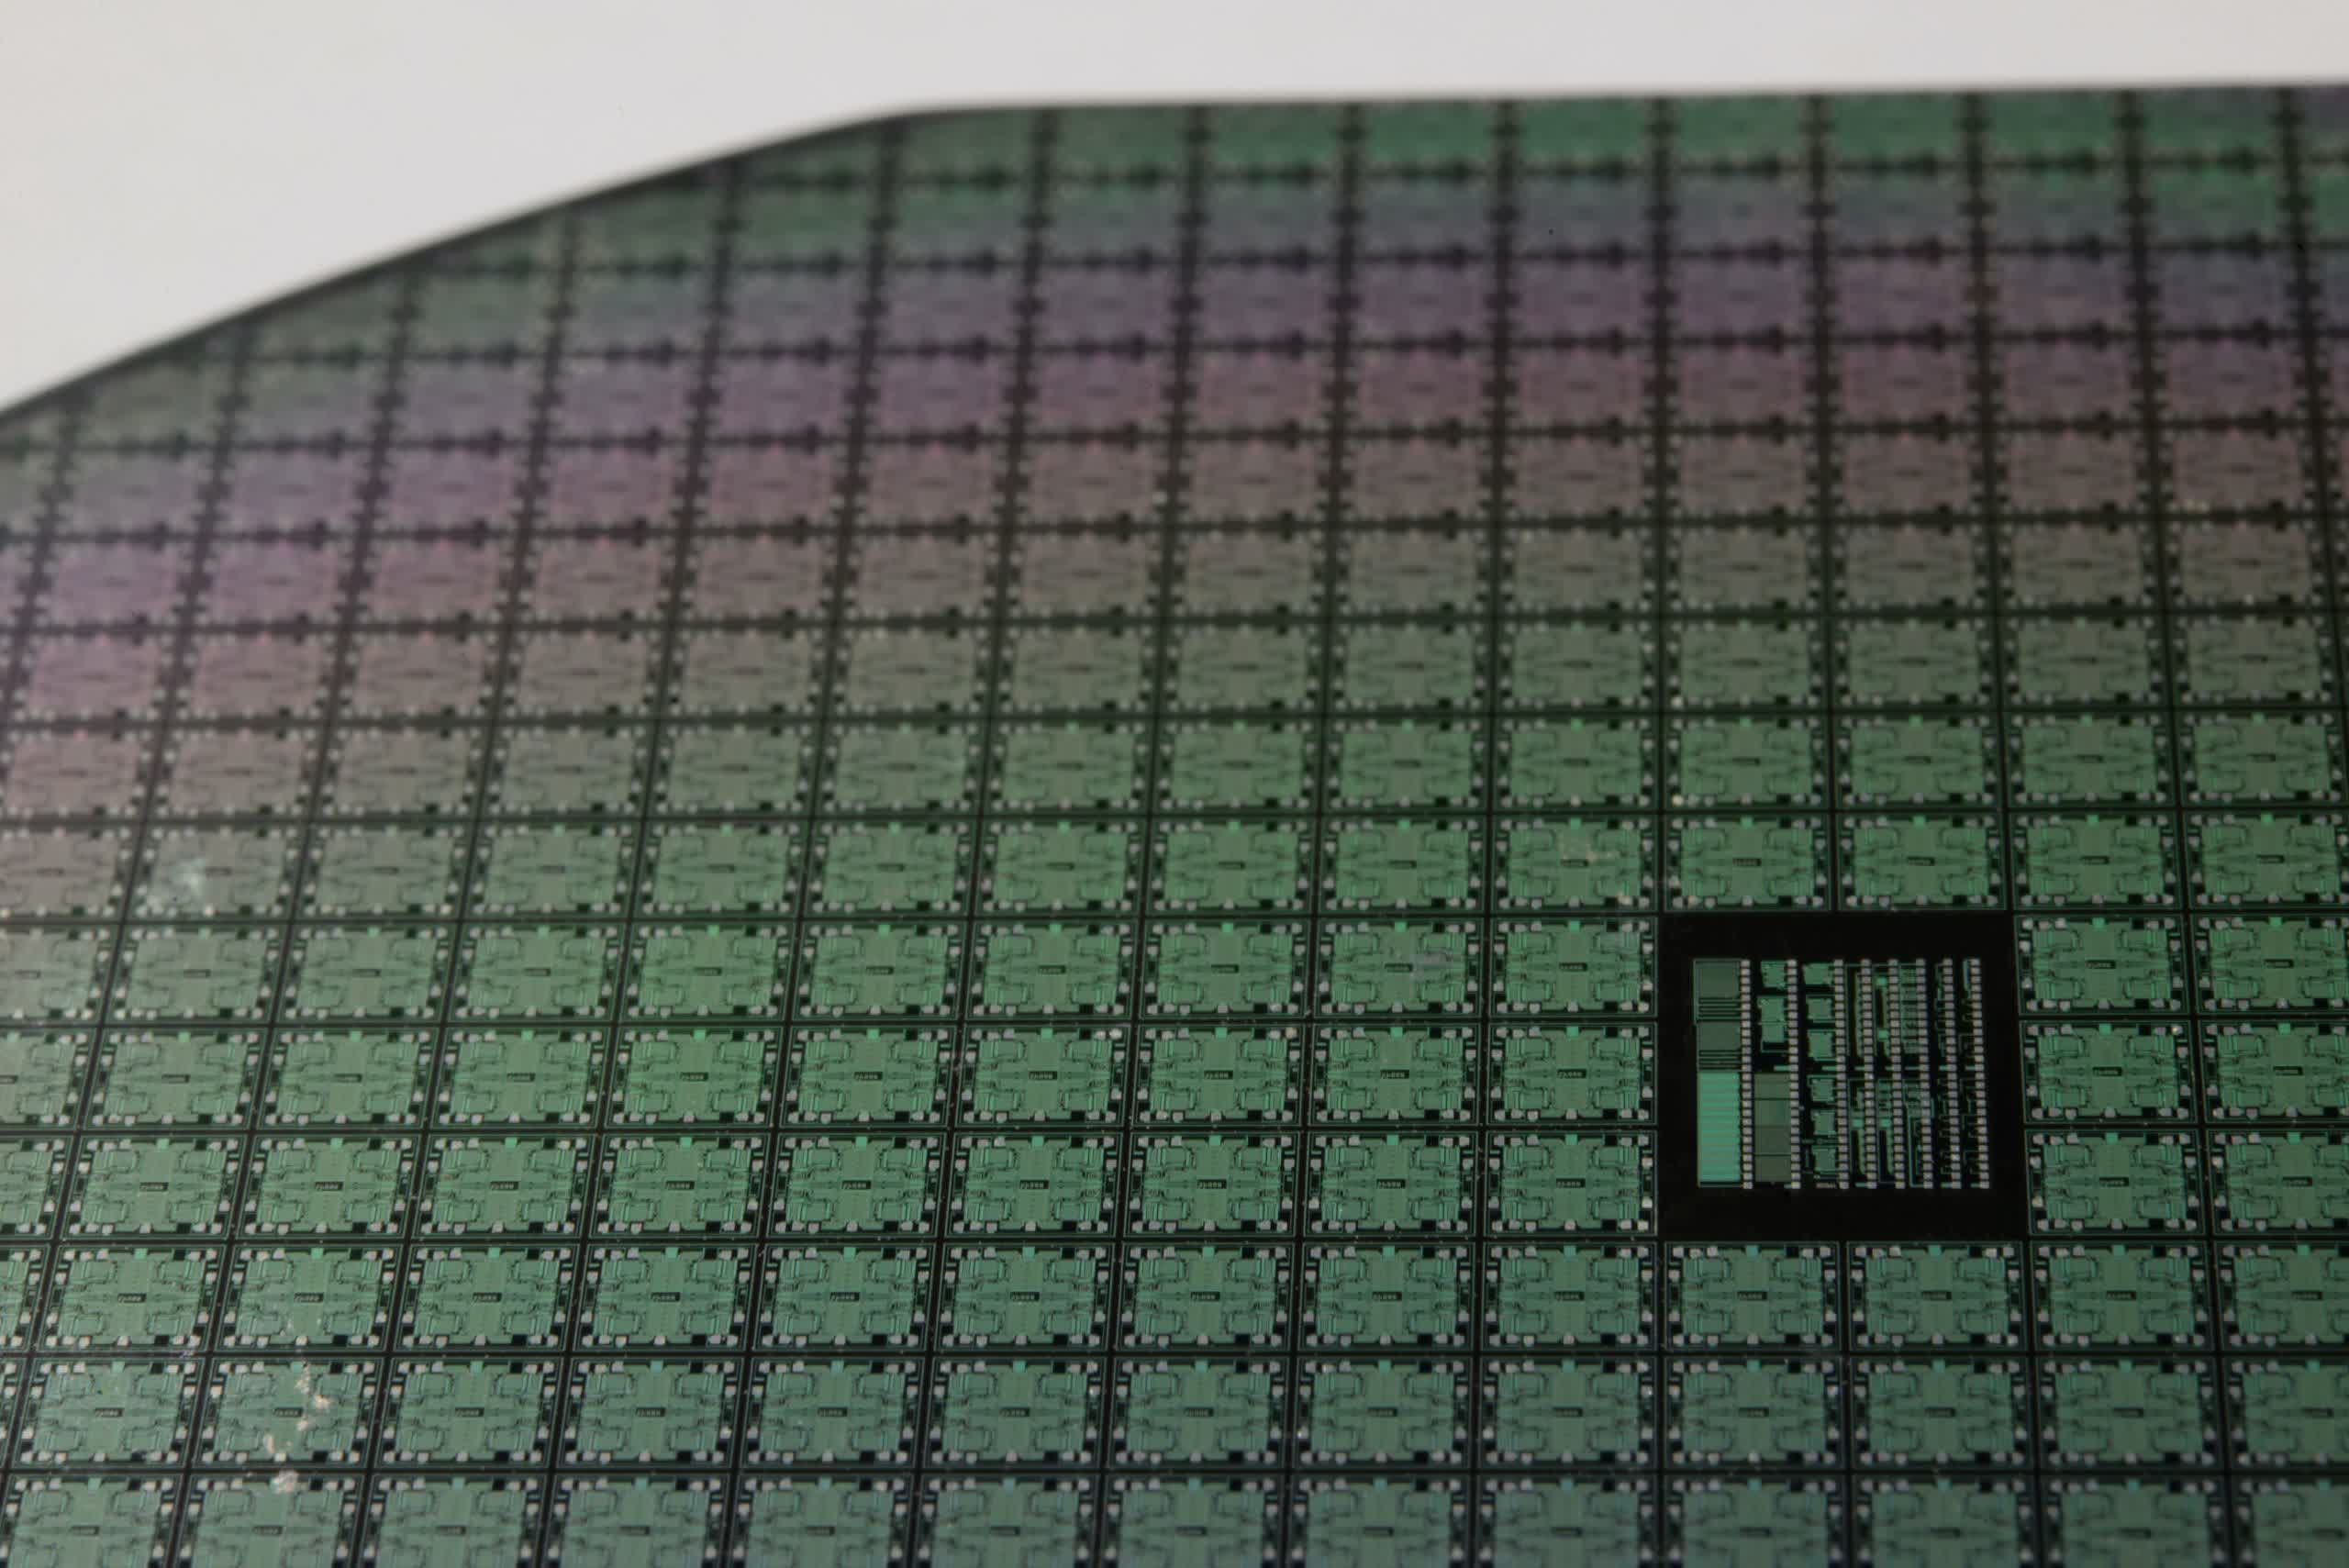 Analysts believe that a single TSMC 5nm wafer costs $17,000